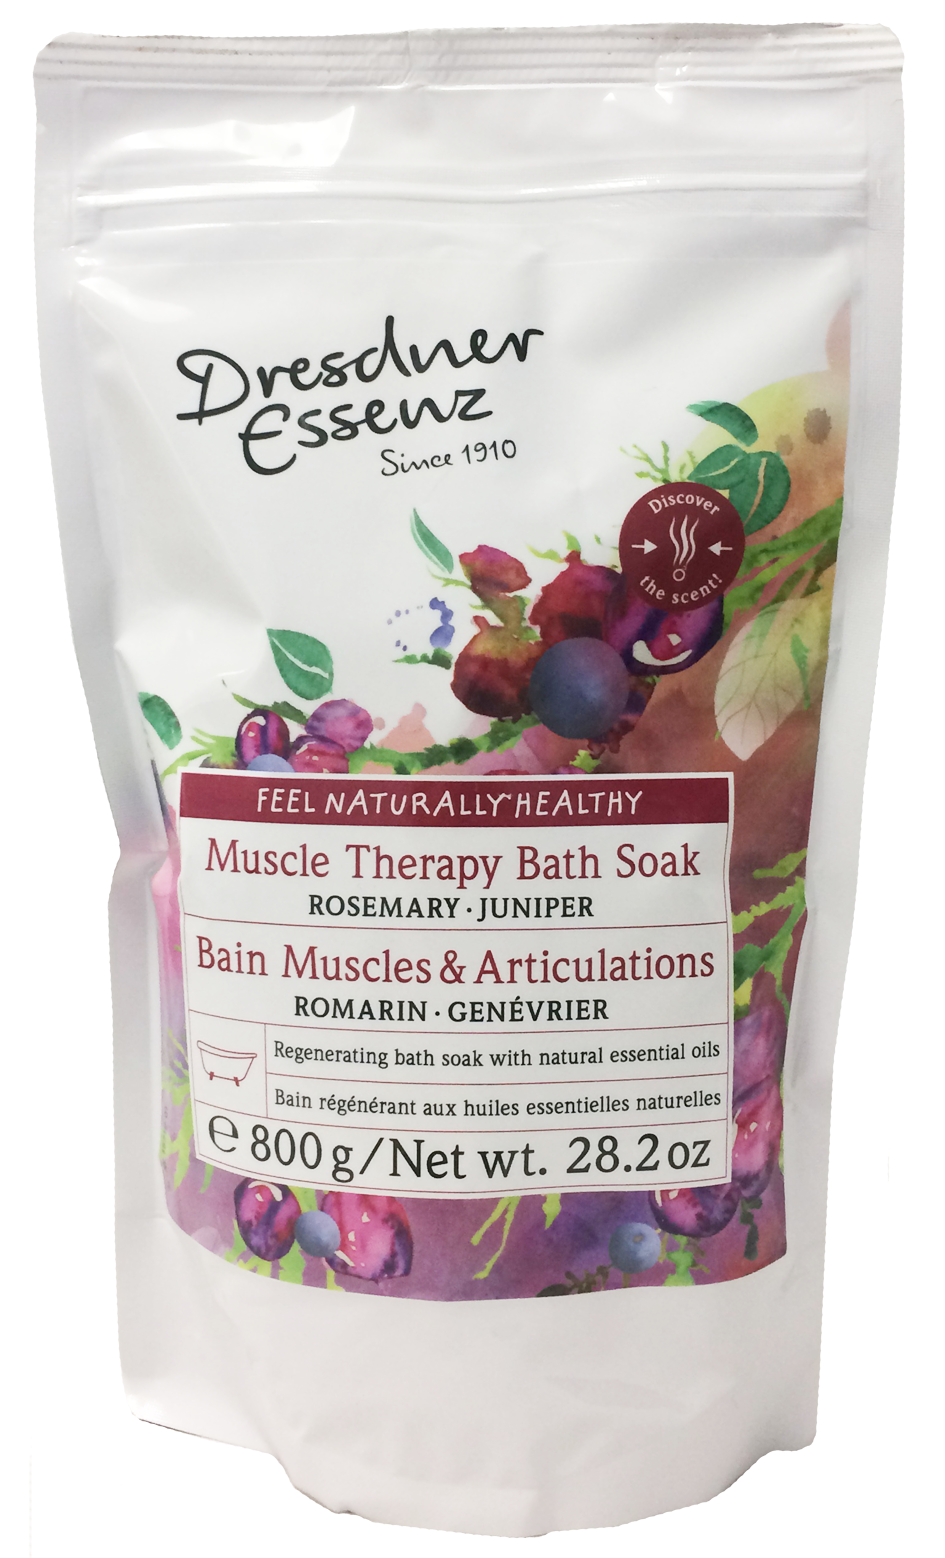 Muscle Therapy Bath Powder, 800g resealable bag